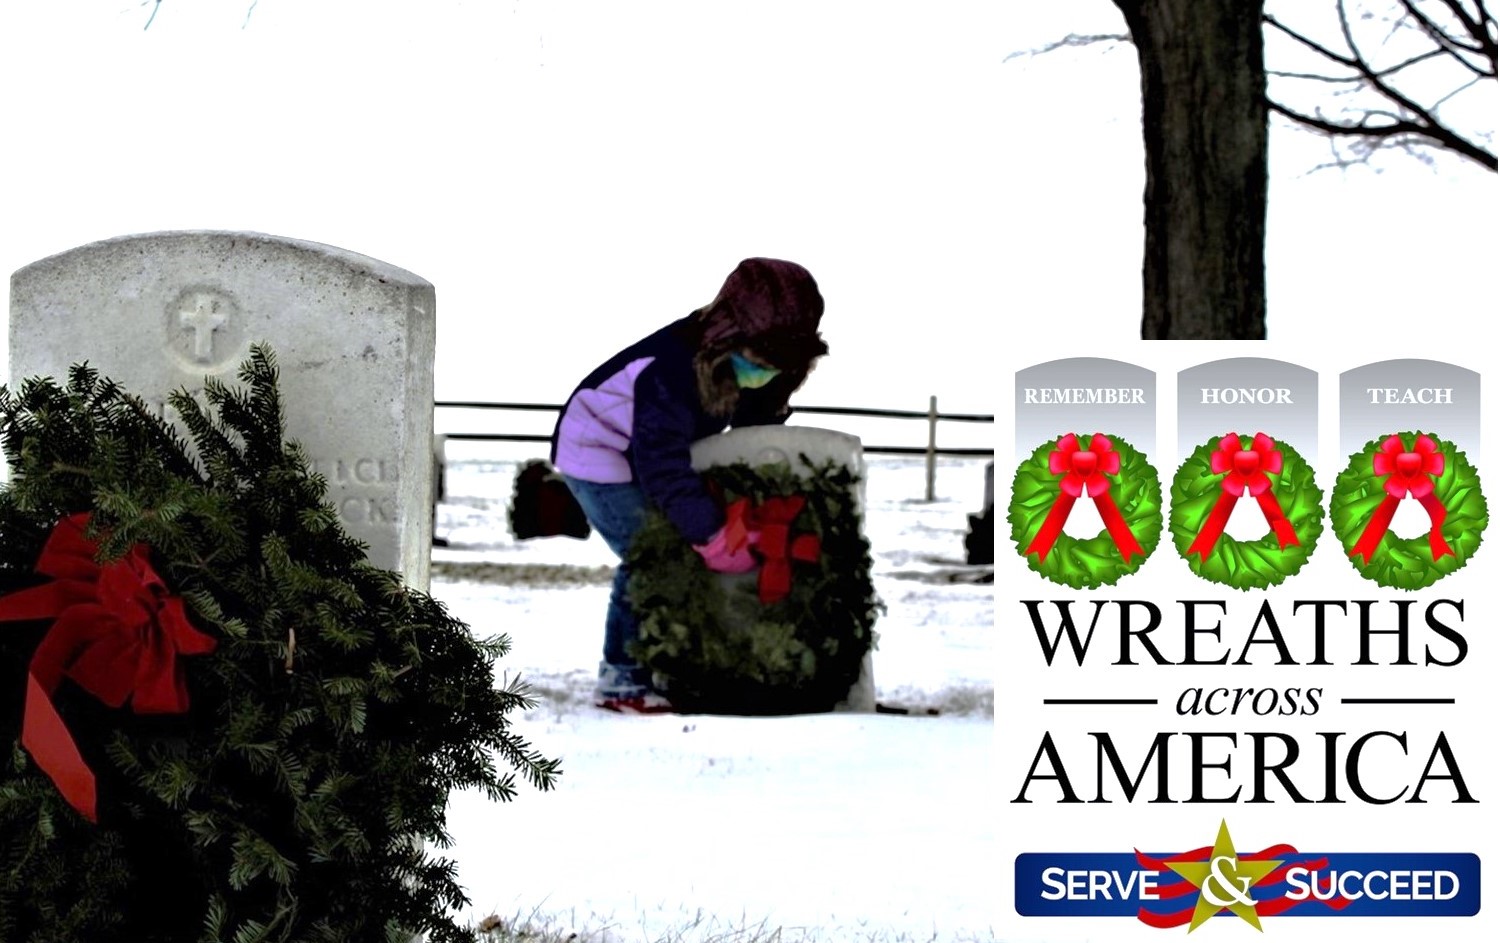 girl places wreath on headstone during winter